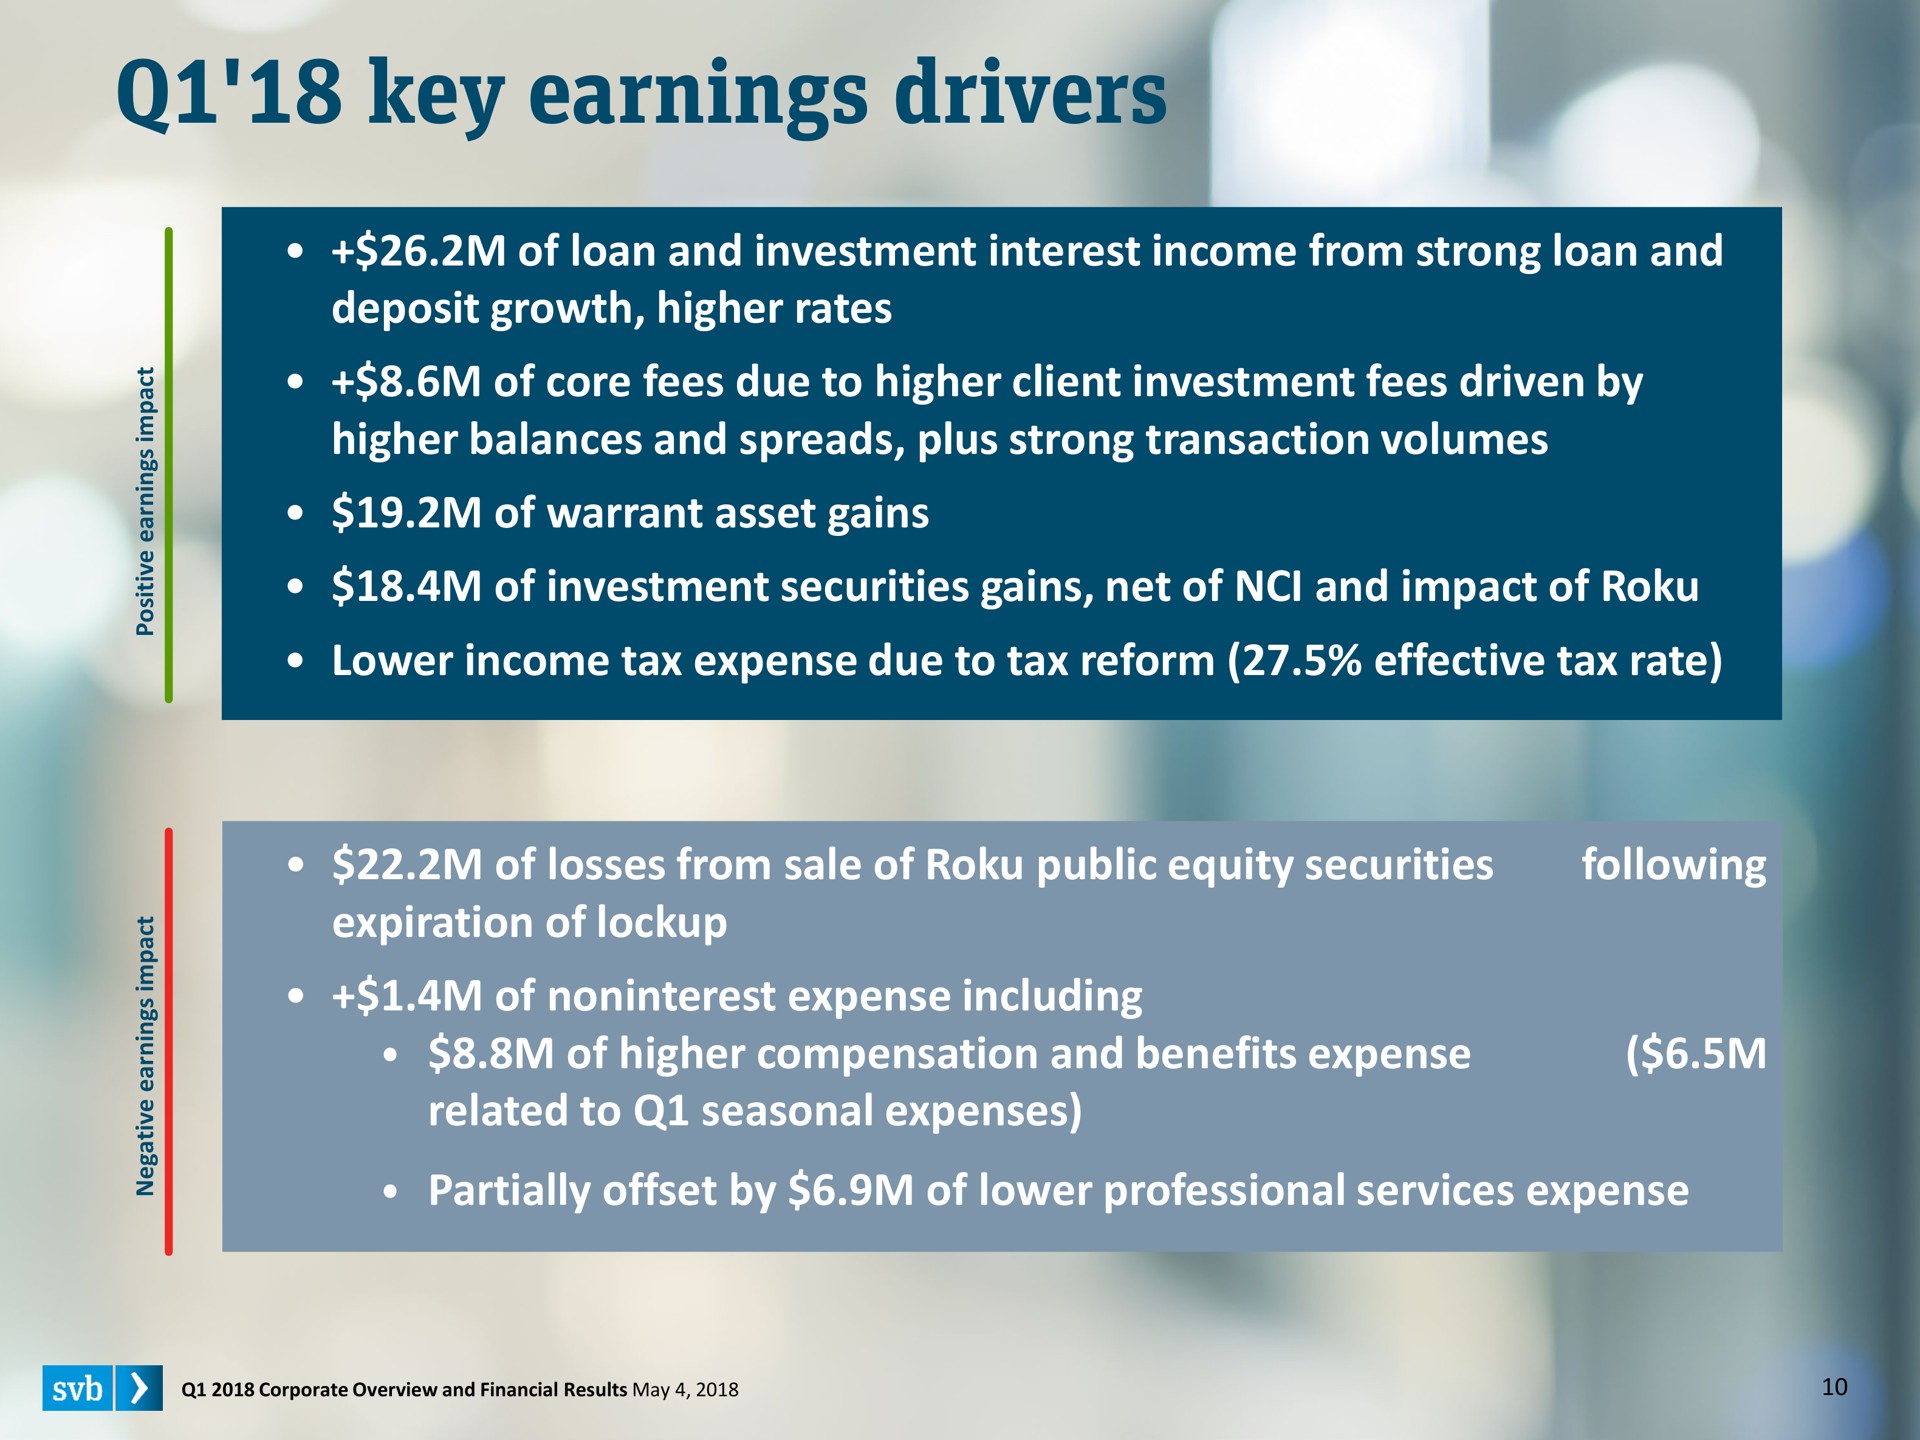 key earnings drivers | Silicon Valley Bank